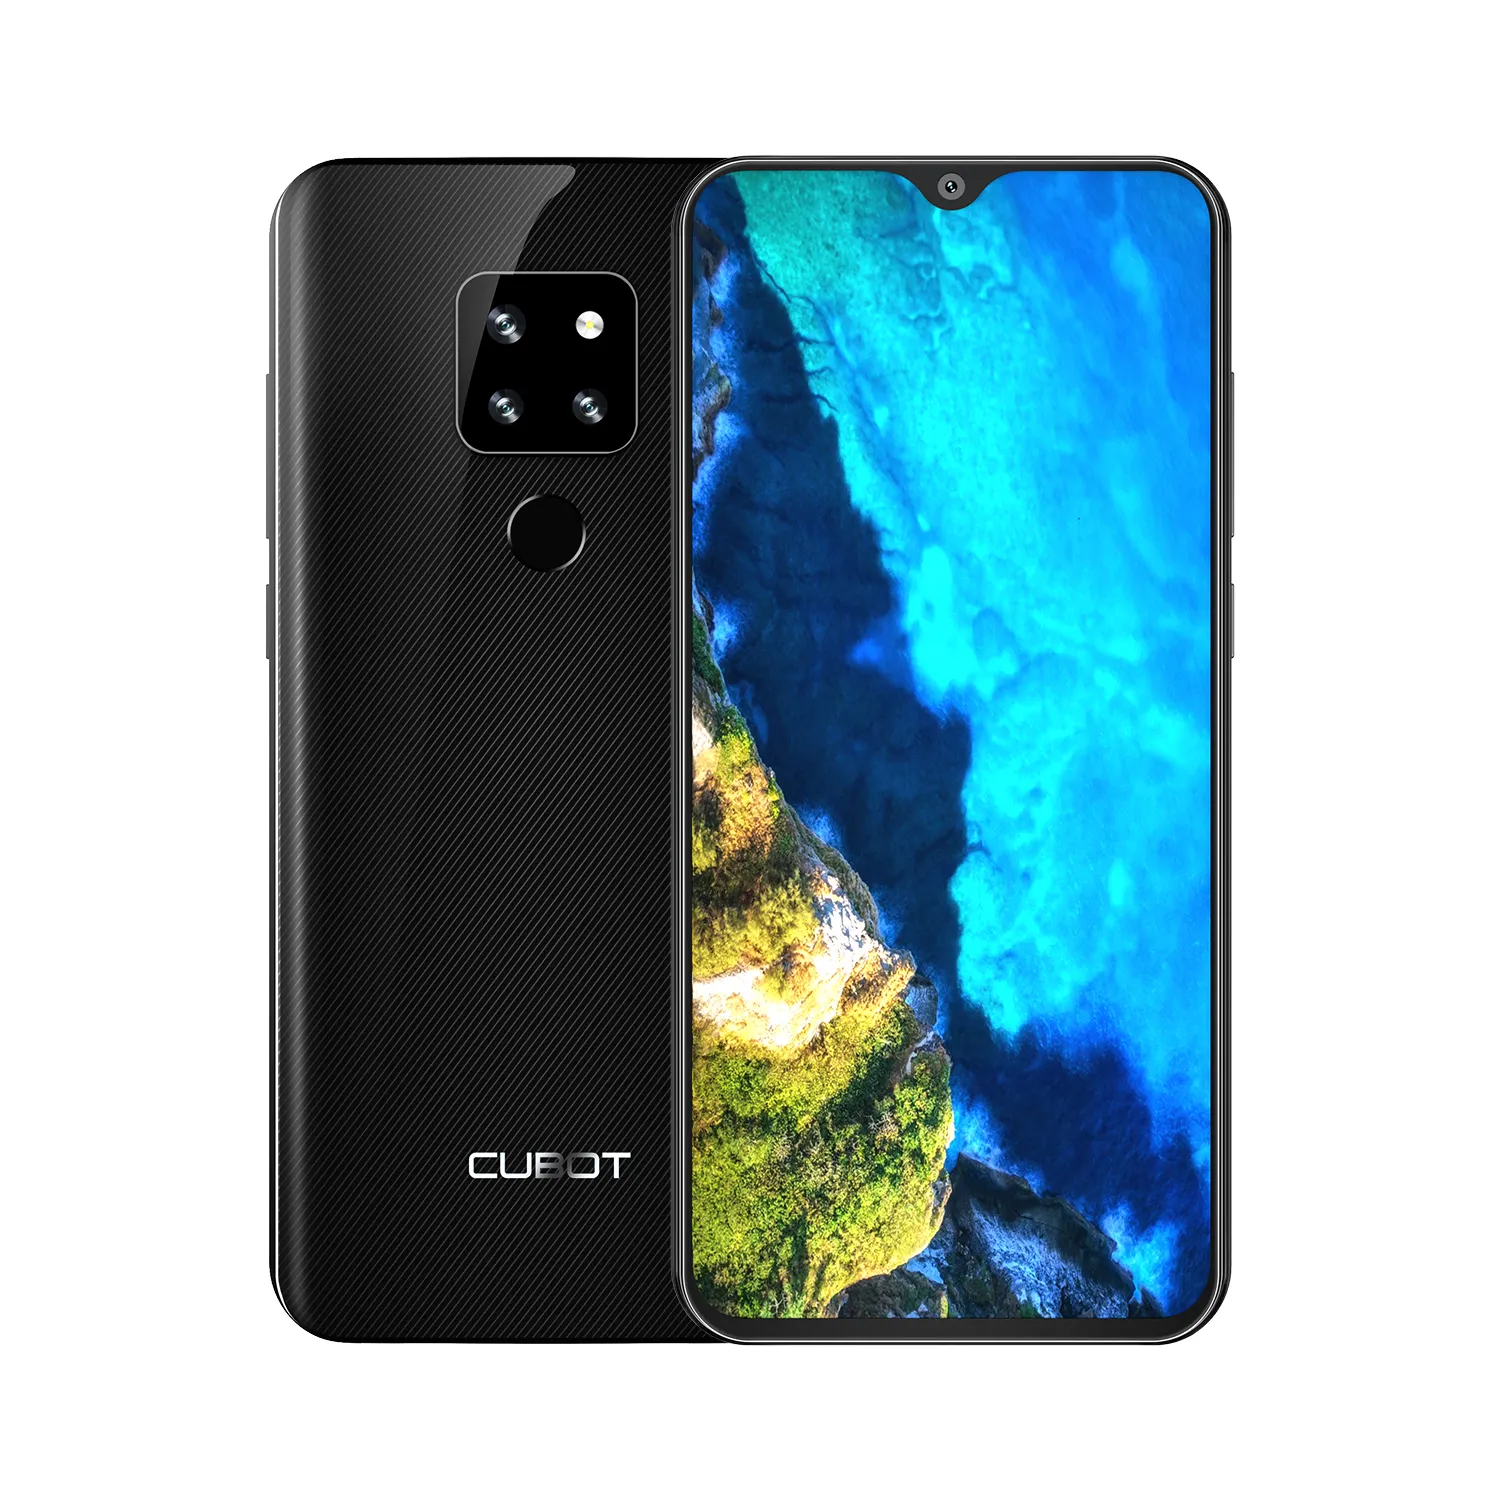 Unlock Smartphone CUBOT P30 Octa core 64GB ROM 6.3inch Waterdrop Screen android 9.0 Mobile Phone